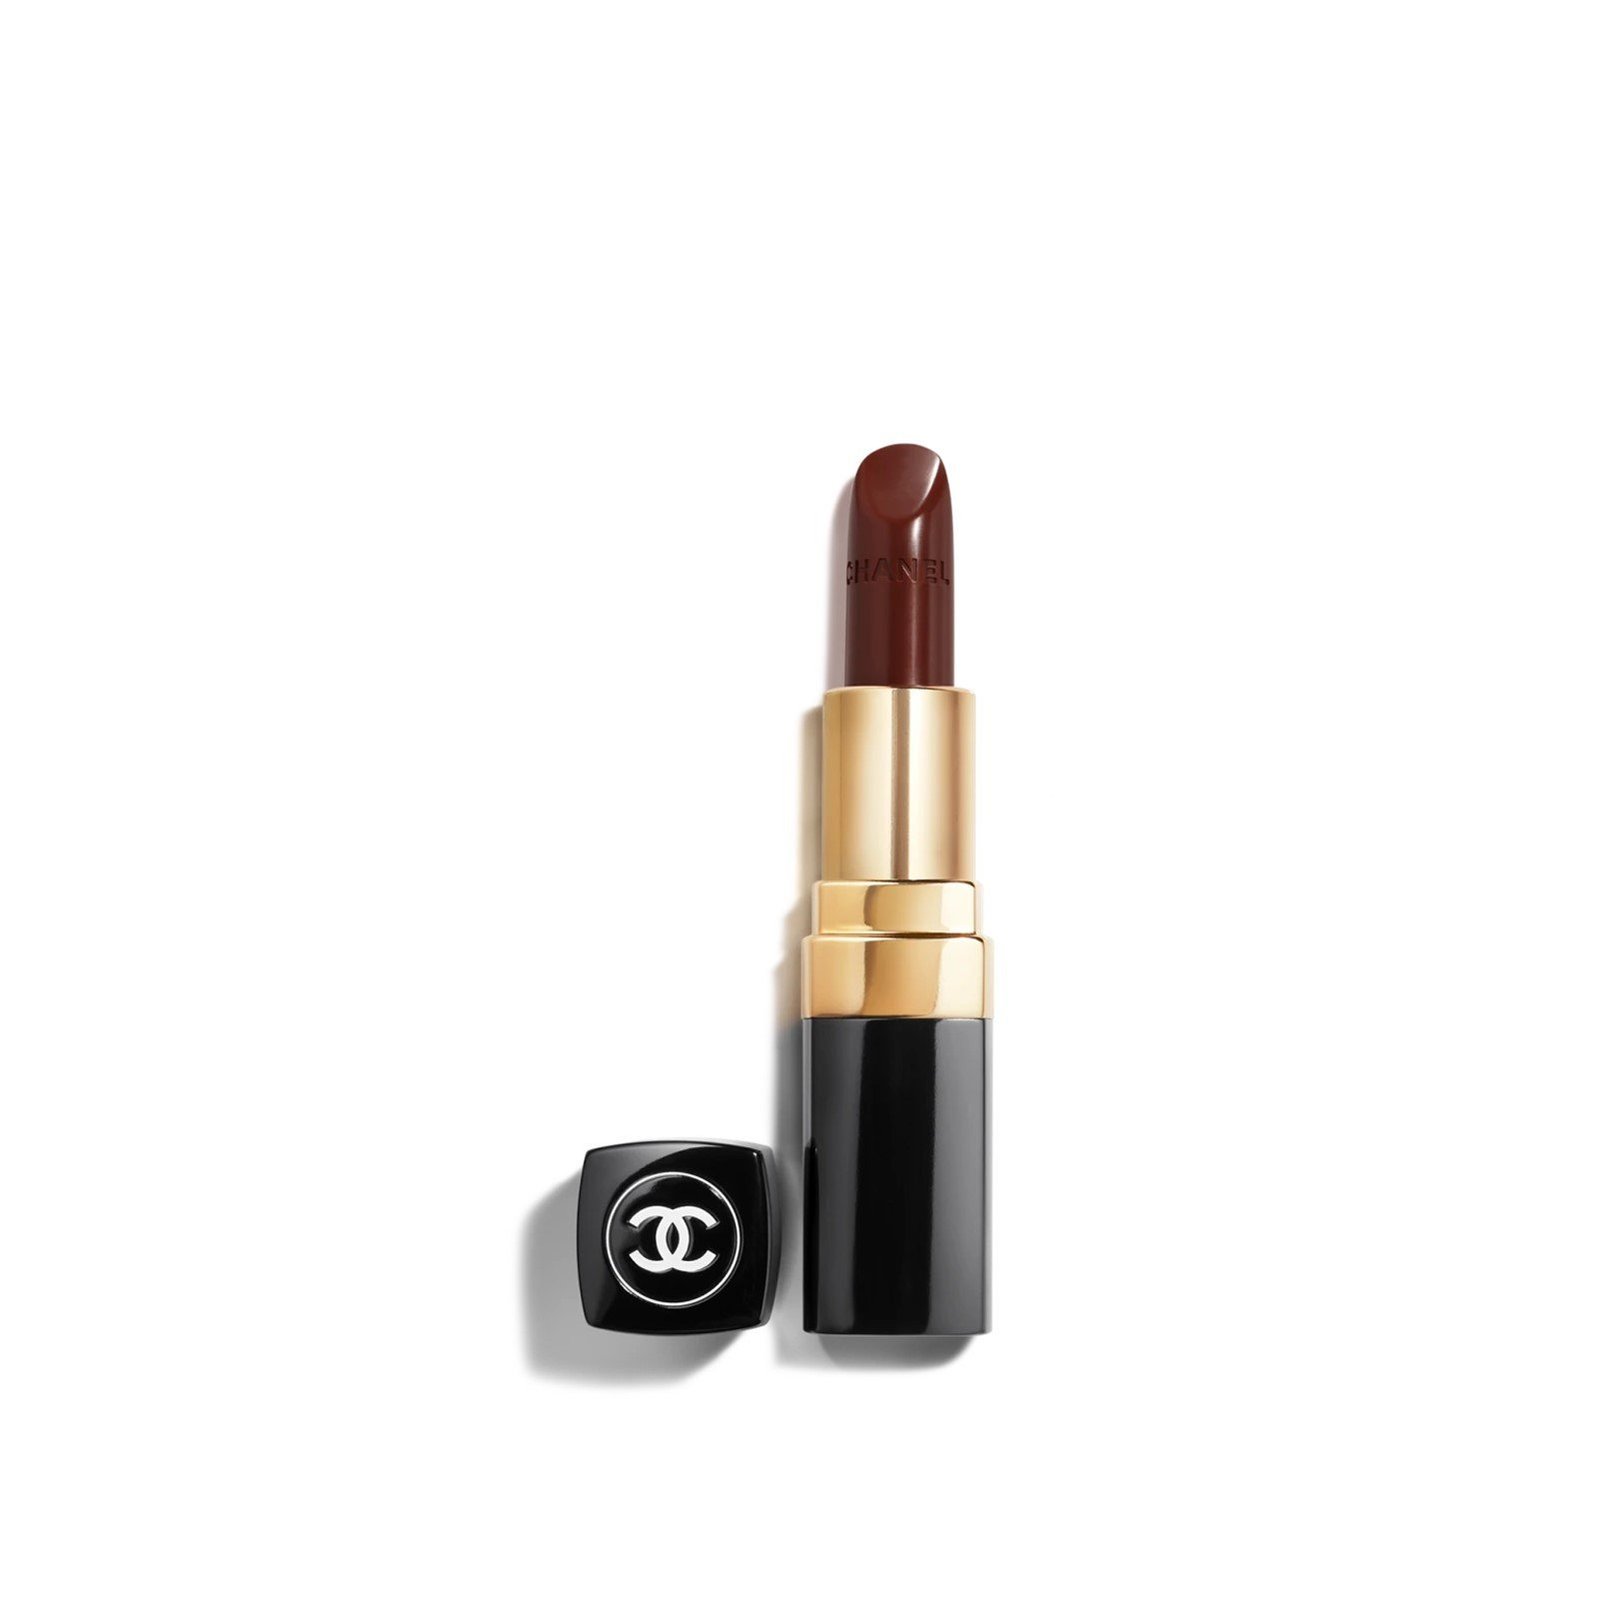 CHANEL Rouge Coco Ultra Hydrating Lip Colour 494 Attraction 3.5g (0.12oz)